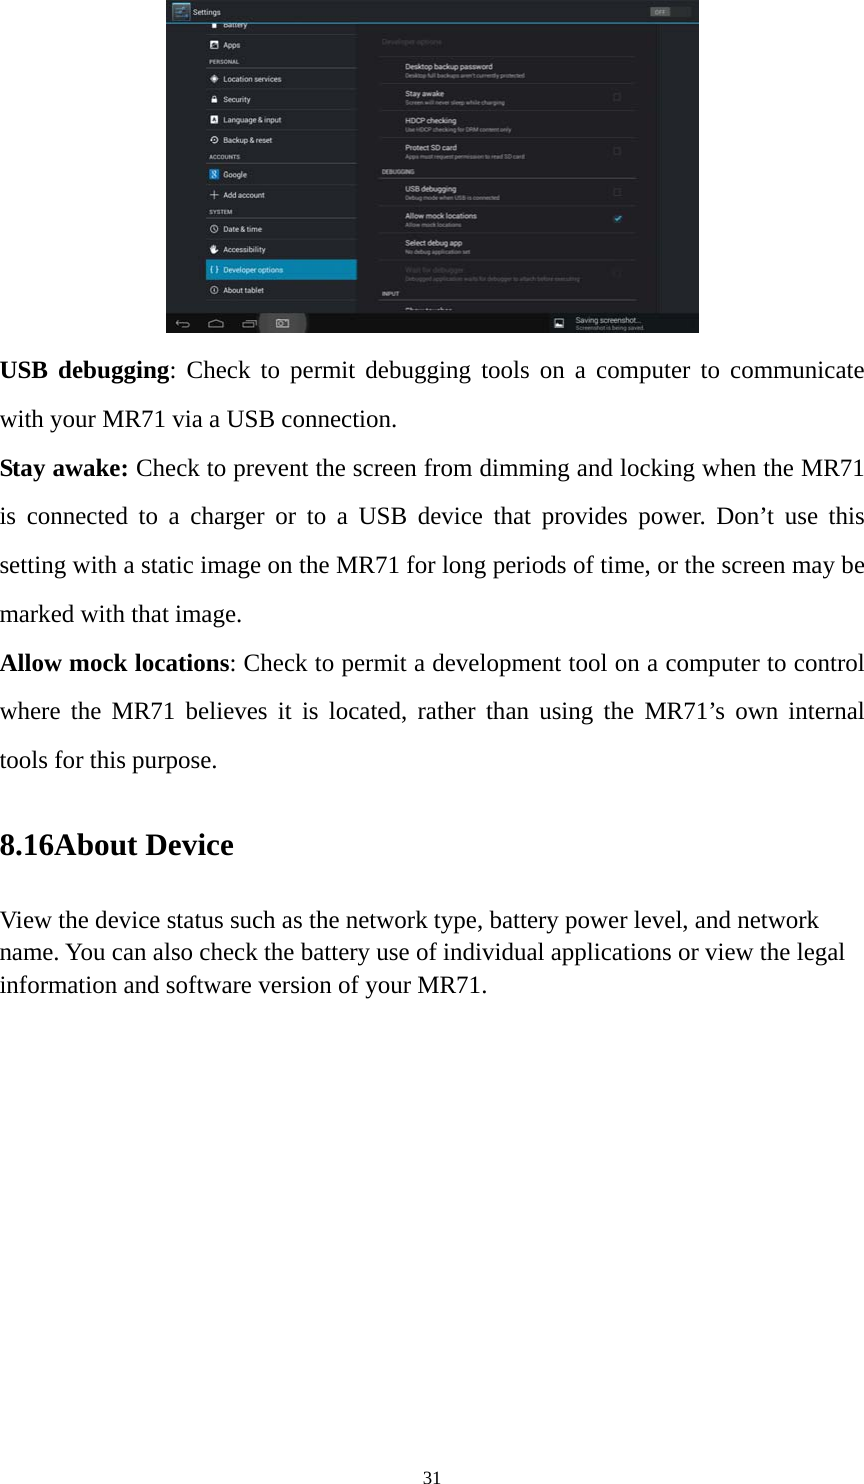 31  USB debugging: Check to permit debugging tools on a computer to communicate with your MR71 via a USB connection. Stay awake: Check to prevent the screen from dimming and locking when the MR71 is connected to a charger or to a USB device that provides power. Don’t use this setting with a static image on the MR71 for long periods of time, or the screen may be marked with that image. Allow mock locations: Check to permit a development tool on a computer to control where the MR71 believes it is located, rather than using the MR71’s own internal tools for this purpose. 8.16About Device View the device status such as the network type, battery power level, and network name. You can also check the battery use of individual applications or view the legal information and software version of your MR71.   